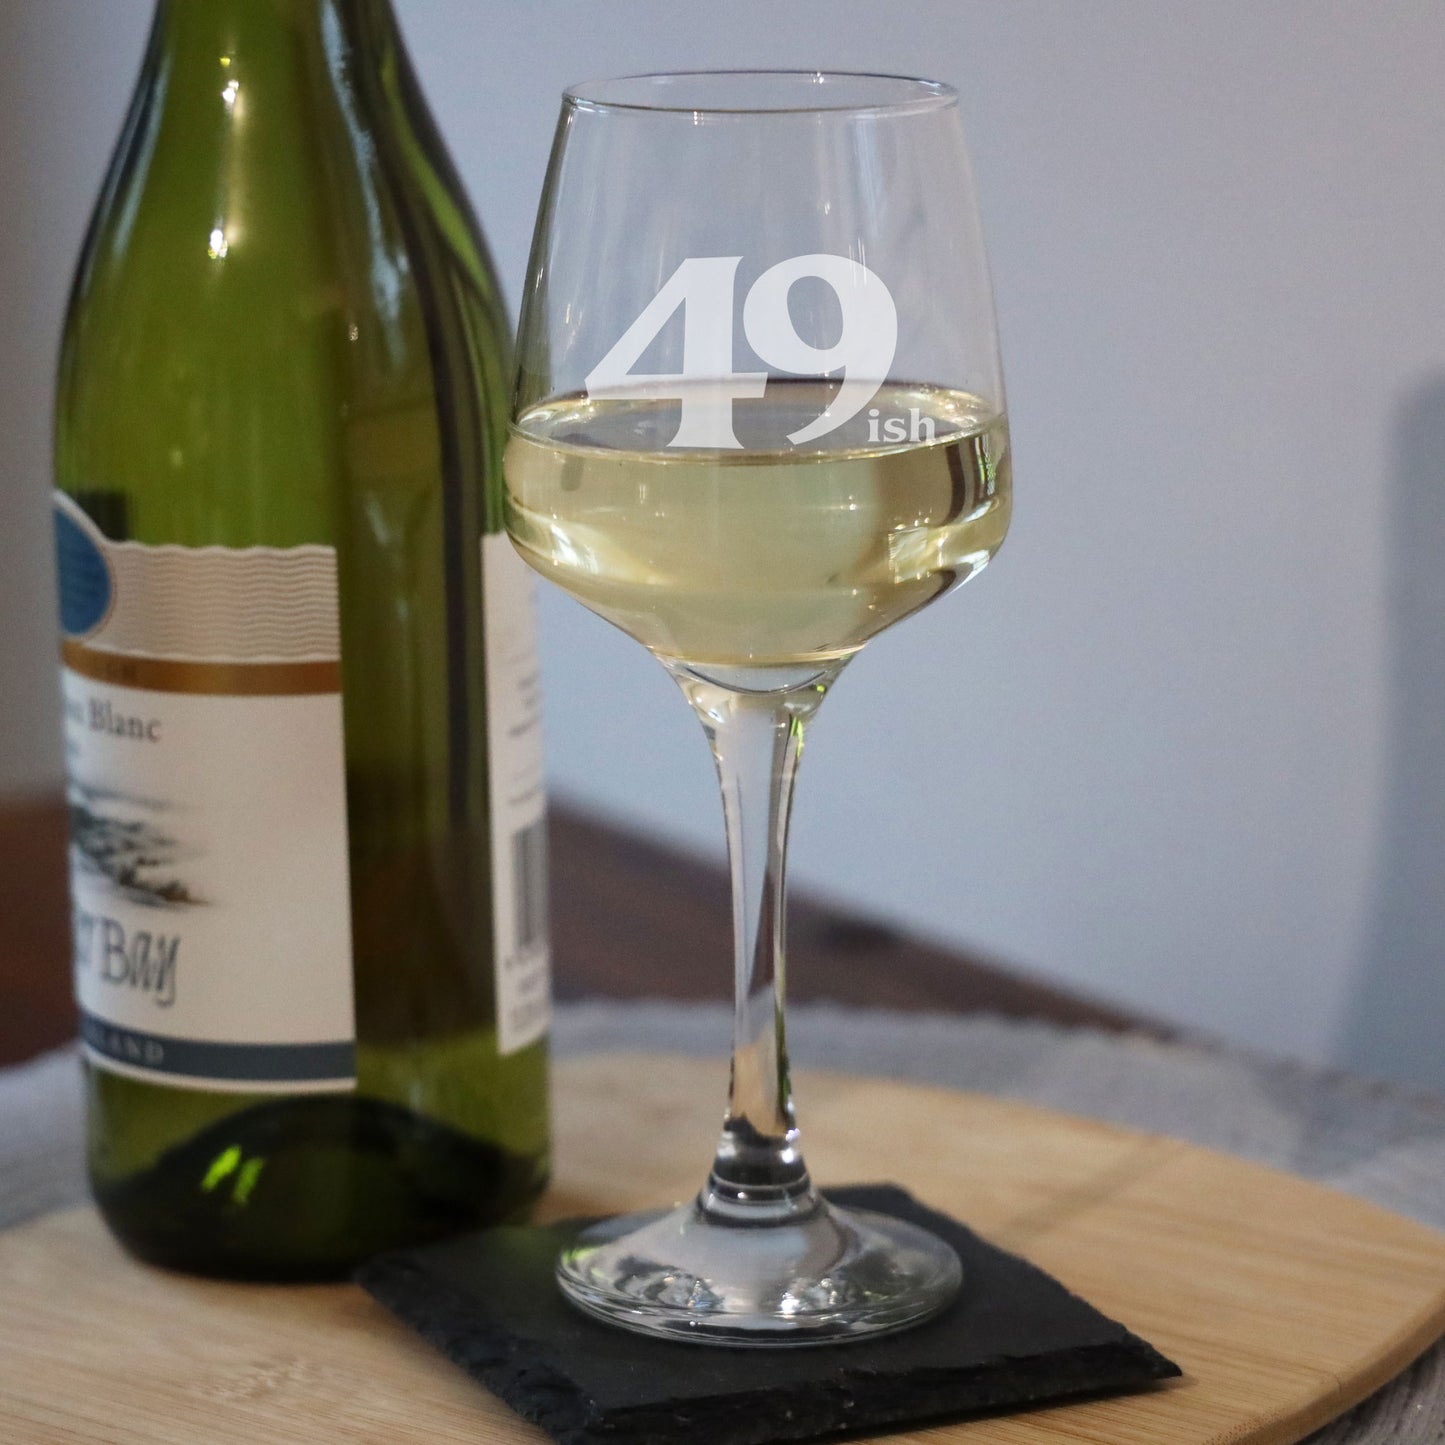 49ish Wine Glass and/or Coaster Set  - Always Looking Good -   